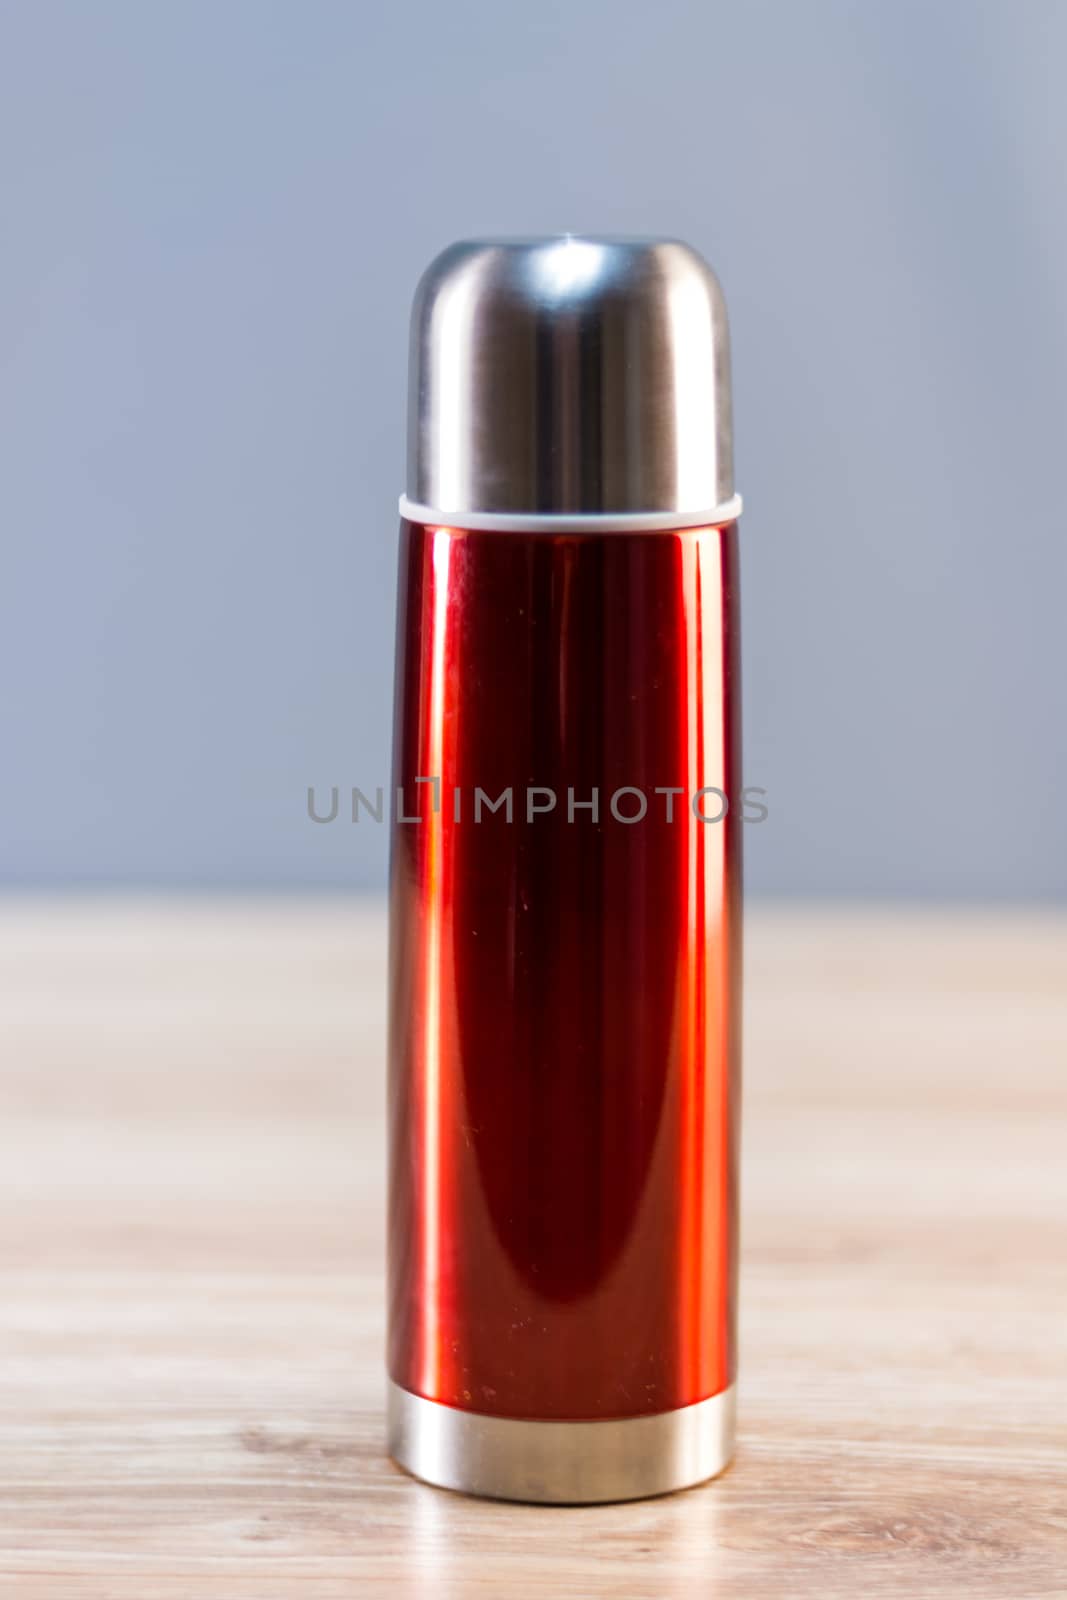 Thermo or Thermo flask on a background